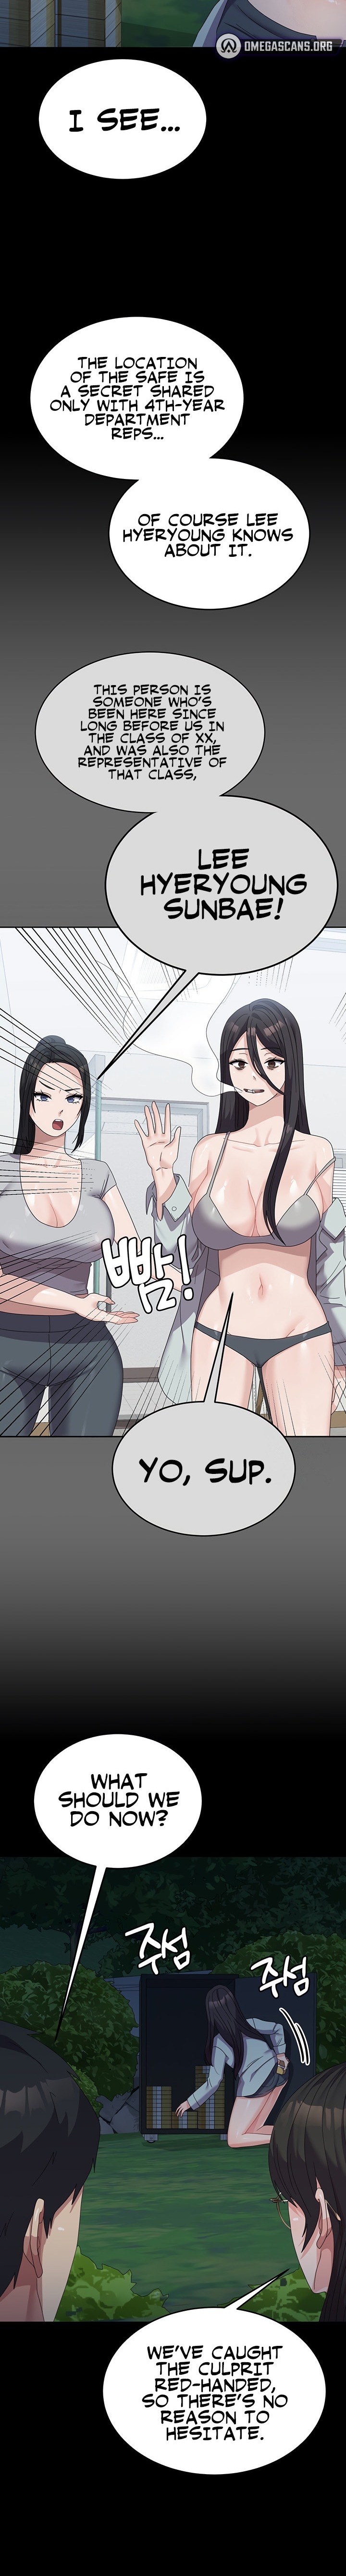 Women’s University Student who Served in the Military - Chapter 37 Page 6